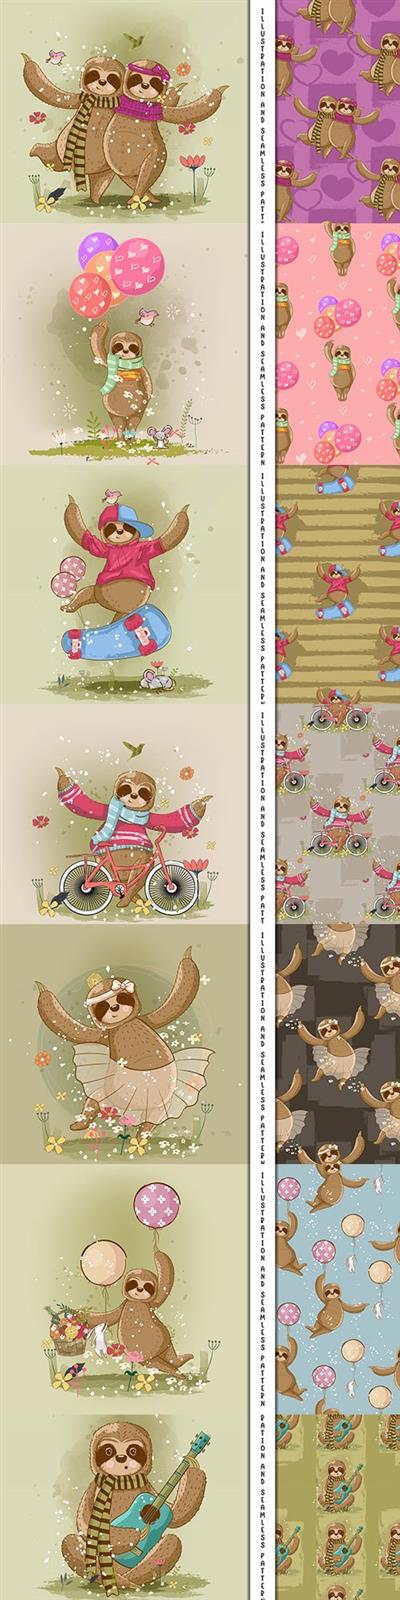 Lazy nice painted cartoon illustrations and pattern